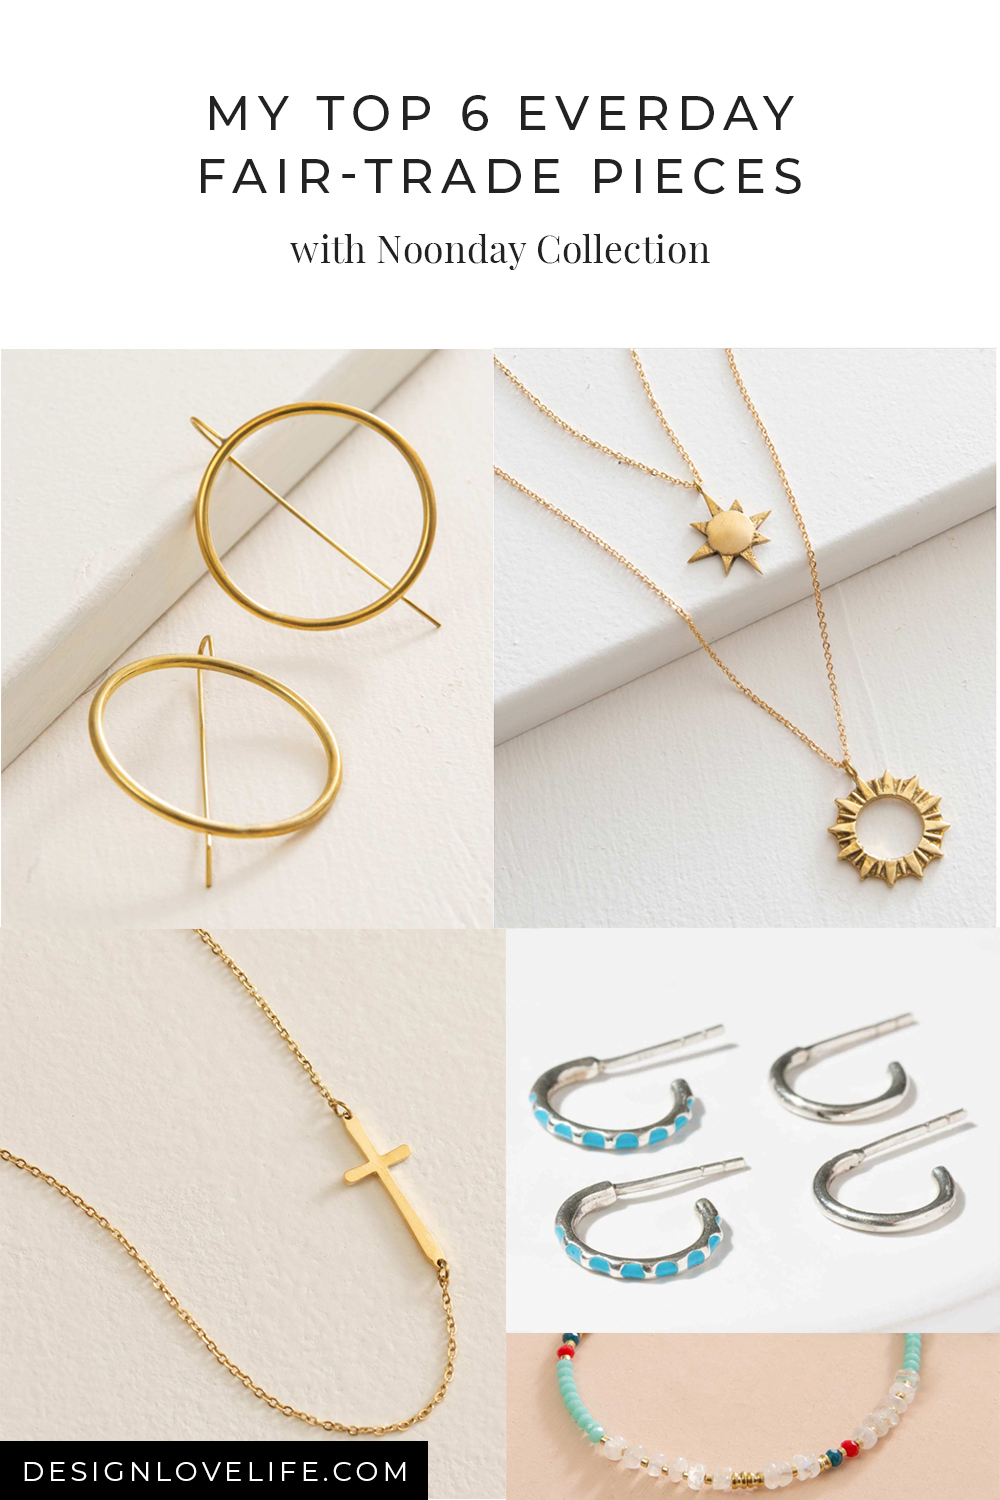 Noonday Collection, fair trade jewelry and accessories. My top 5 favorite everyday pieces.